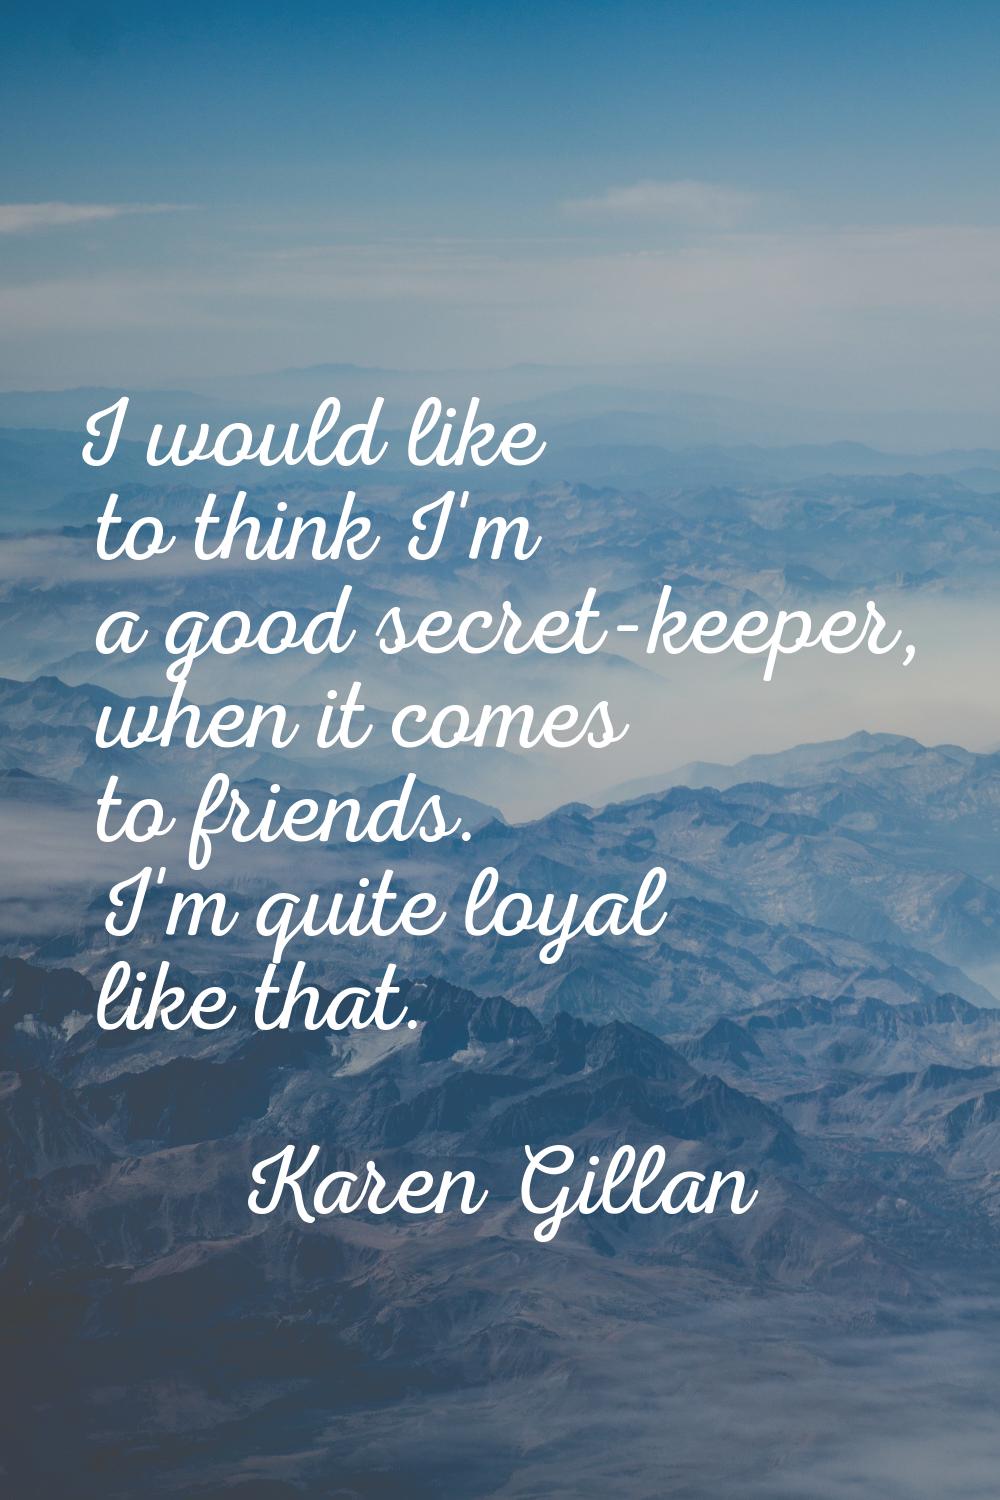 I would like to think I'm a good secret-keeper, when it comes to friends. I'm quite loyal like that